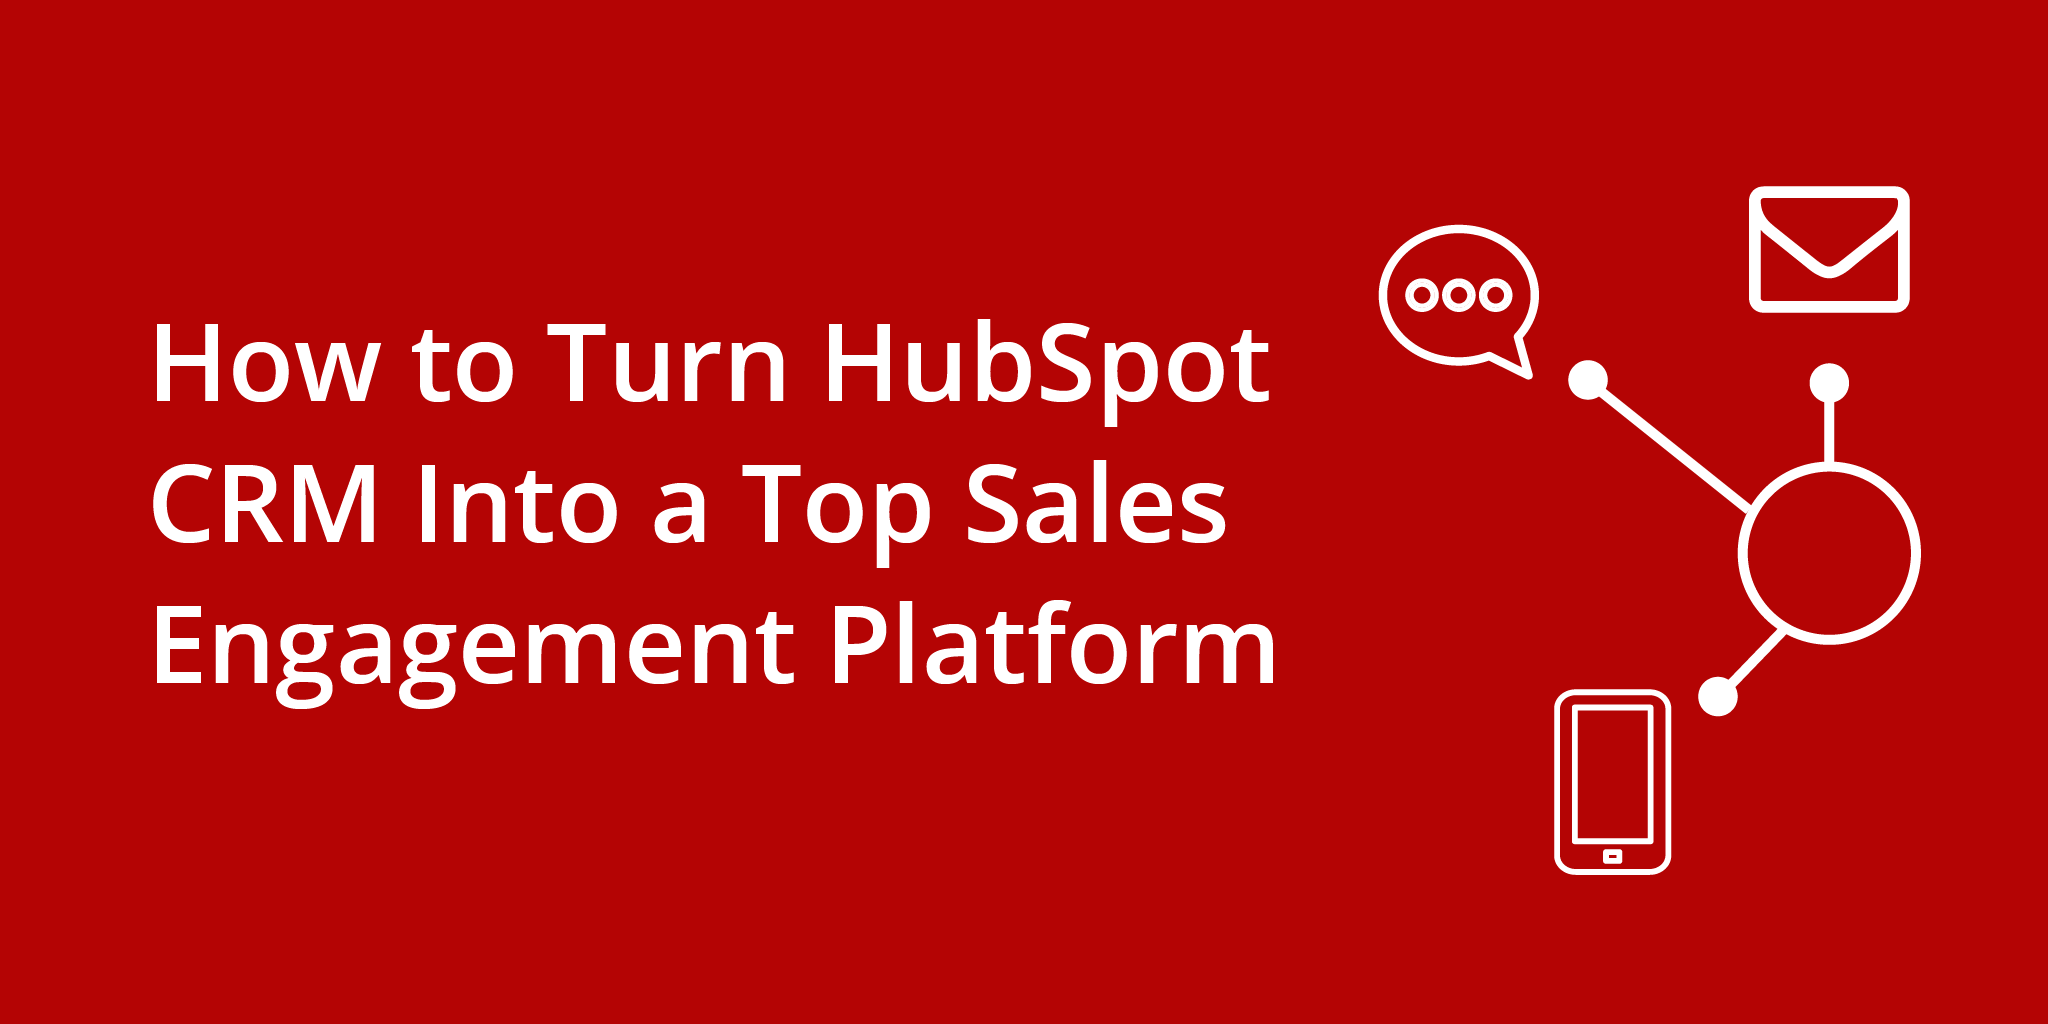 How to Turn HubSpot CRM Into a Top Sales Engagement Platform